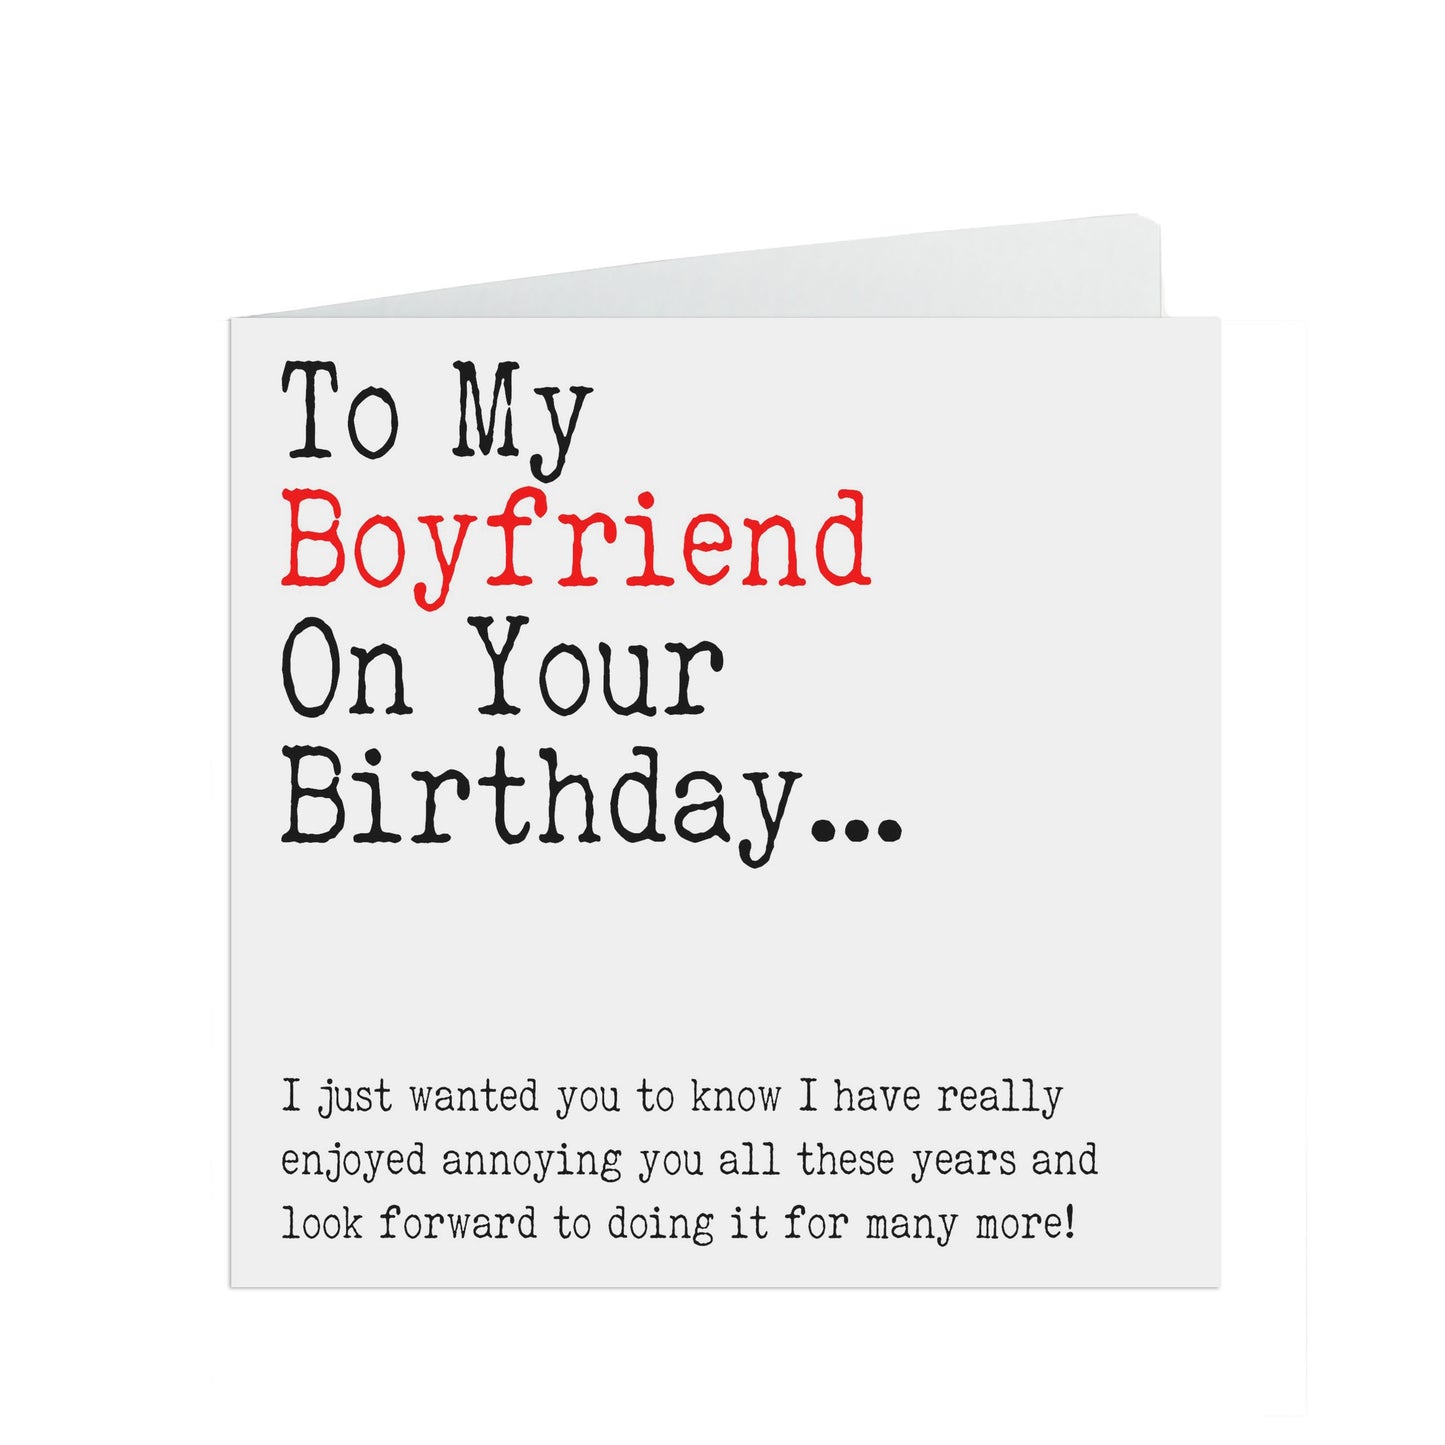 Funny Boyfriend Birthday Card, I Have Really Enjoyed Annoying You All These Years